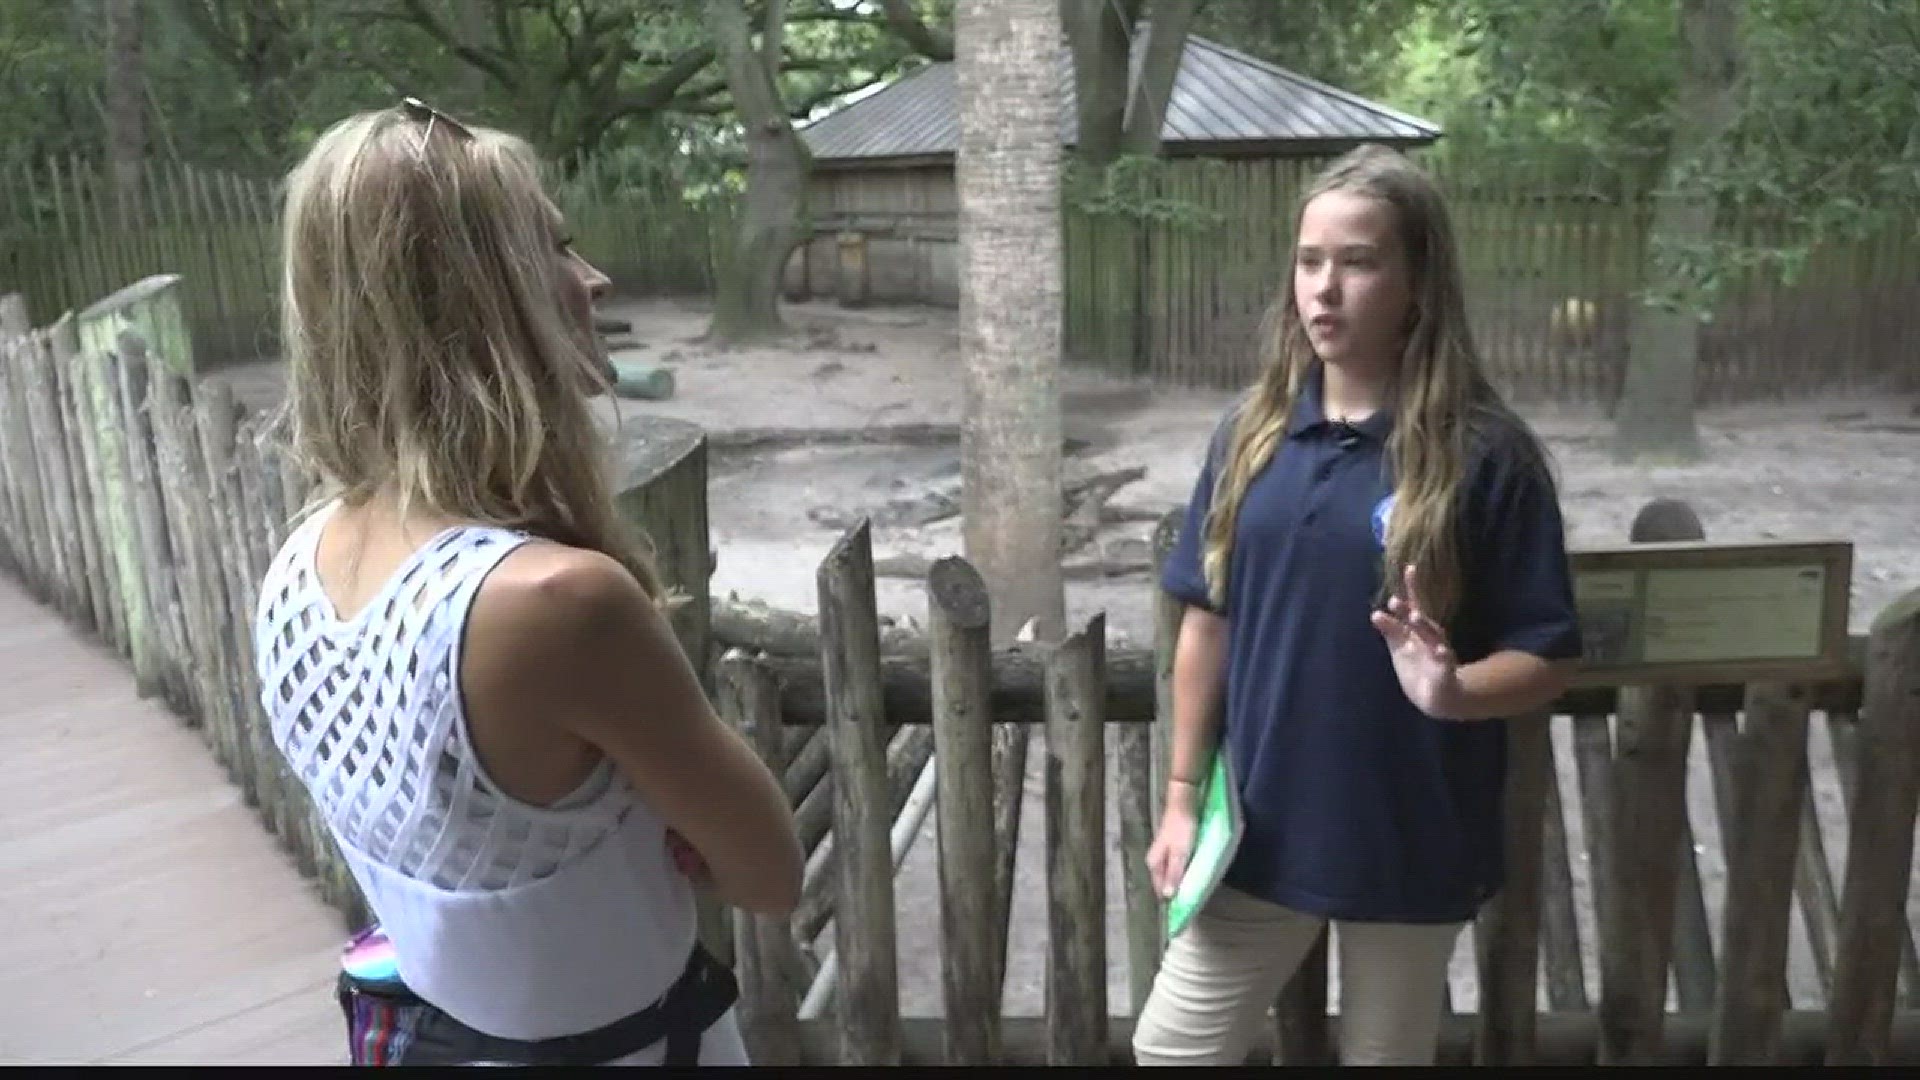 Officials and children at the Jacksonville Zoo had a chance to look at the effects of the solar eclipse on animals there.